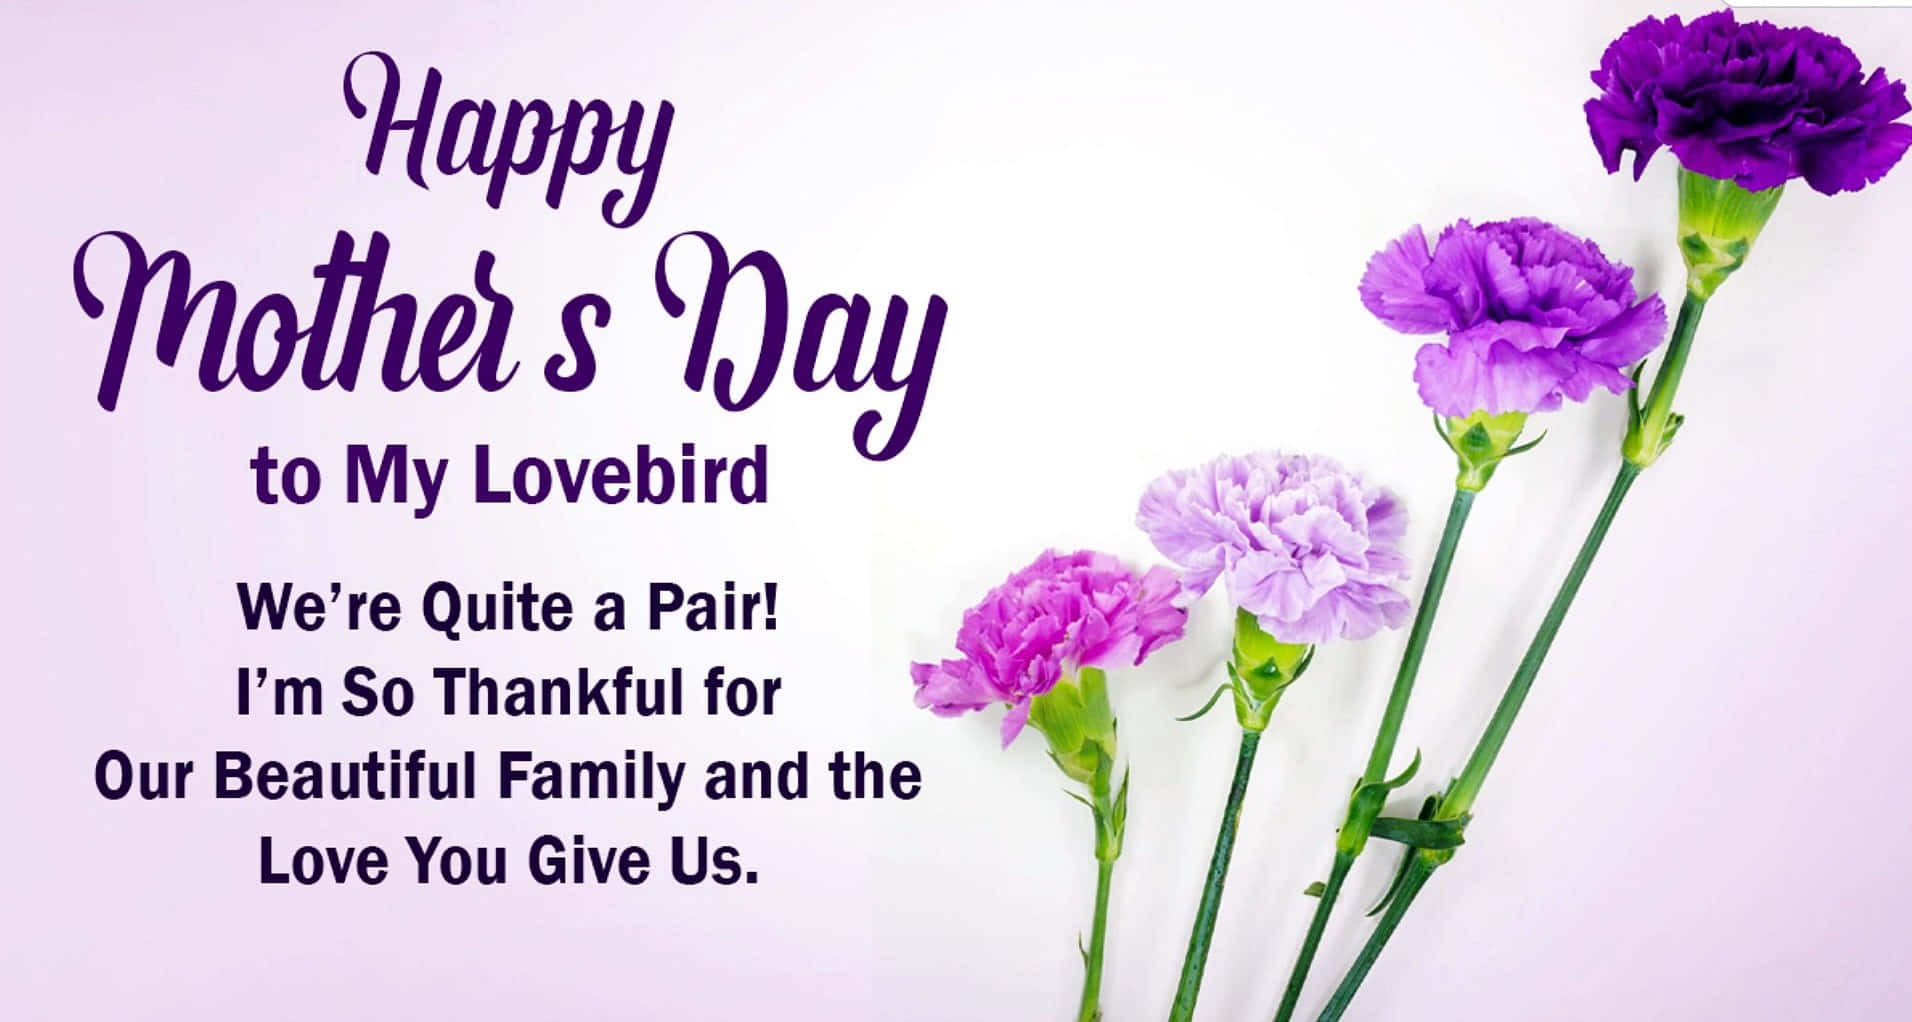 Mothers Day Wishes – Celebrate the timeless bond between maternal love and appreciation.